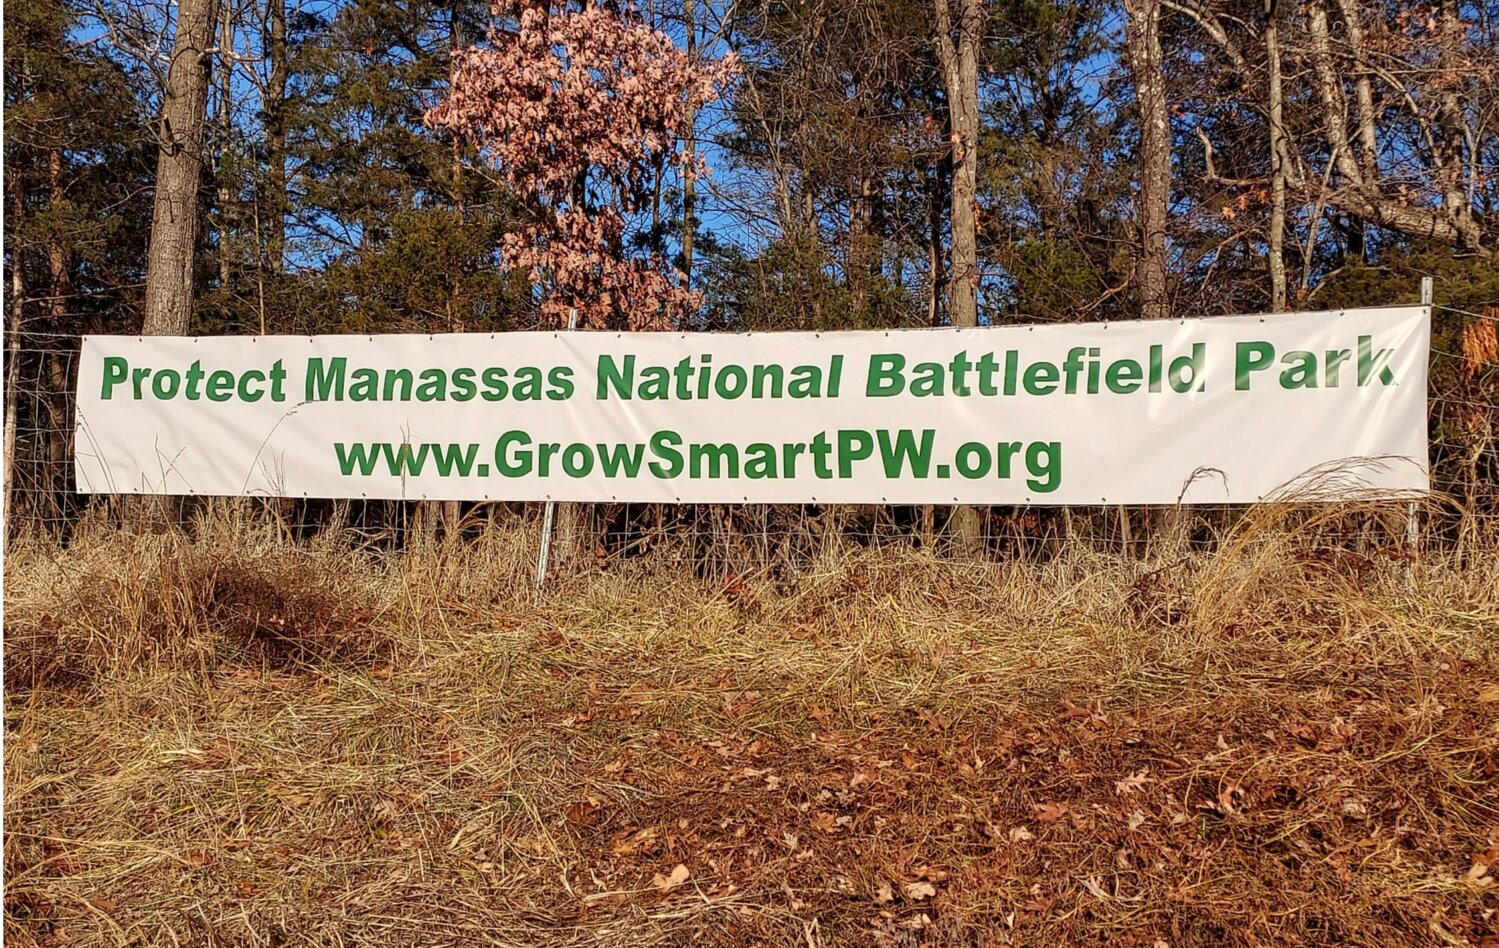 Sign recommends the preservation of the Manassas National Battlefield